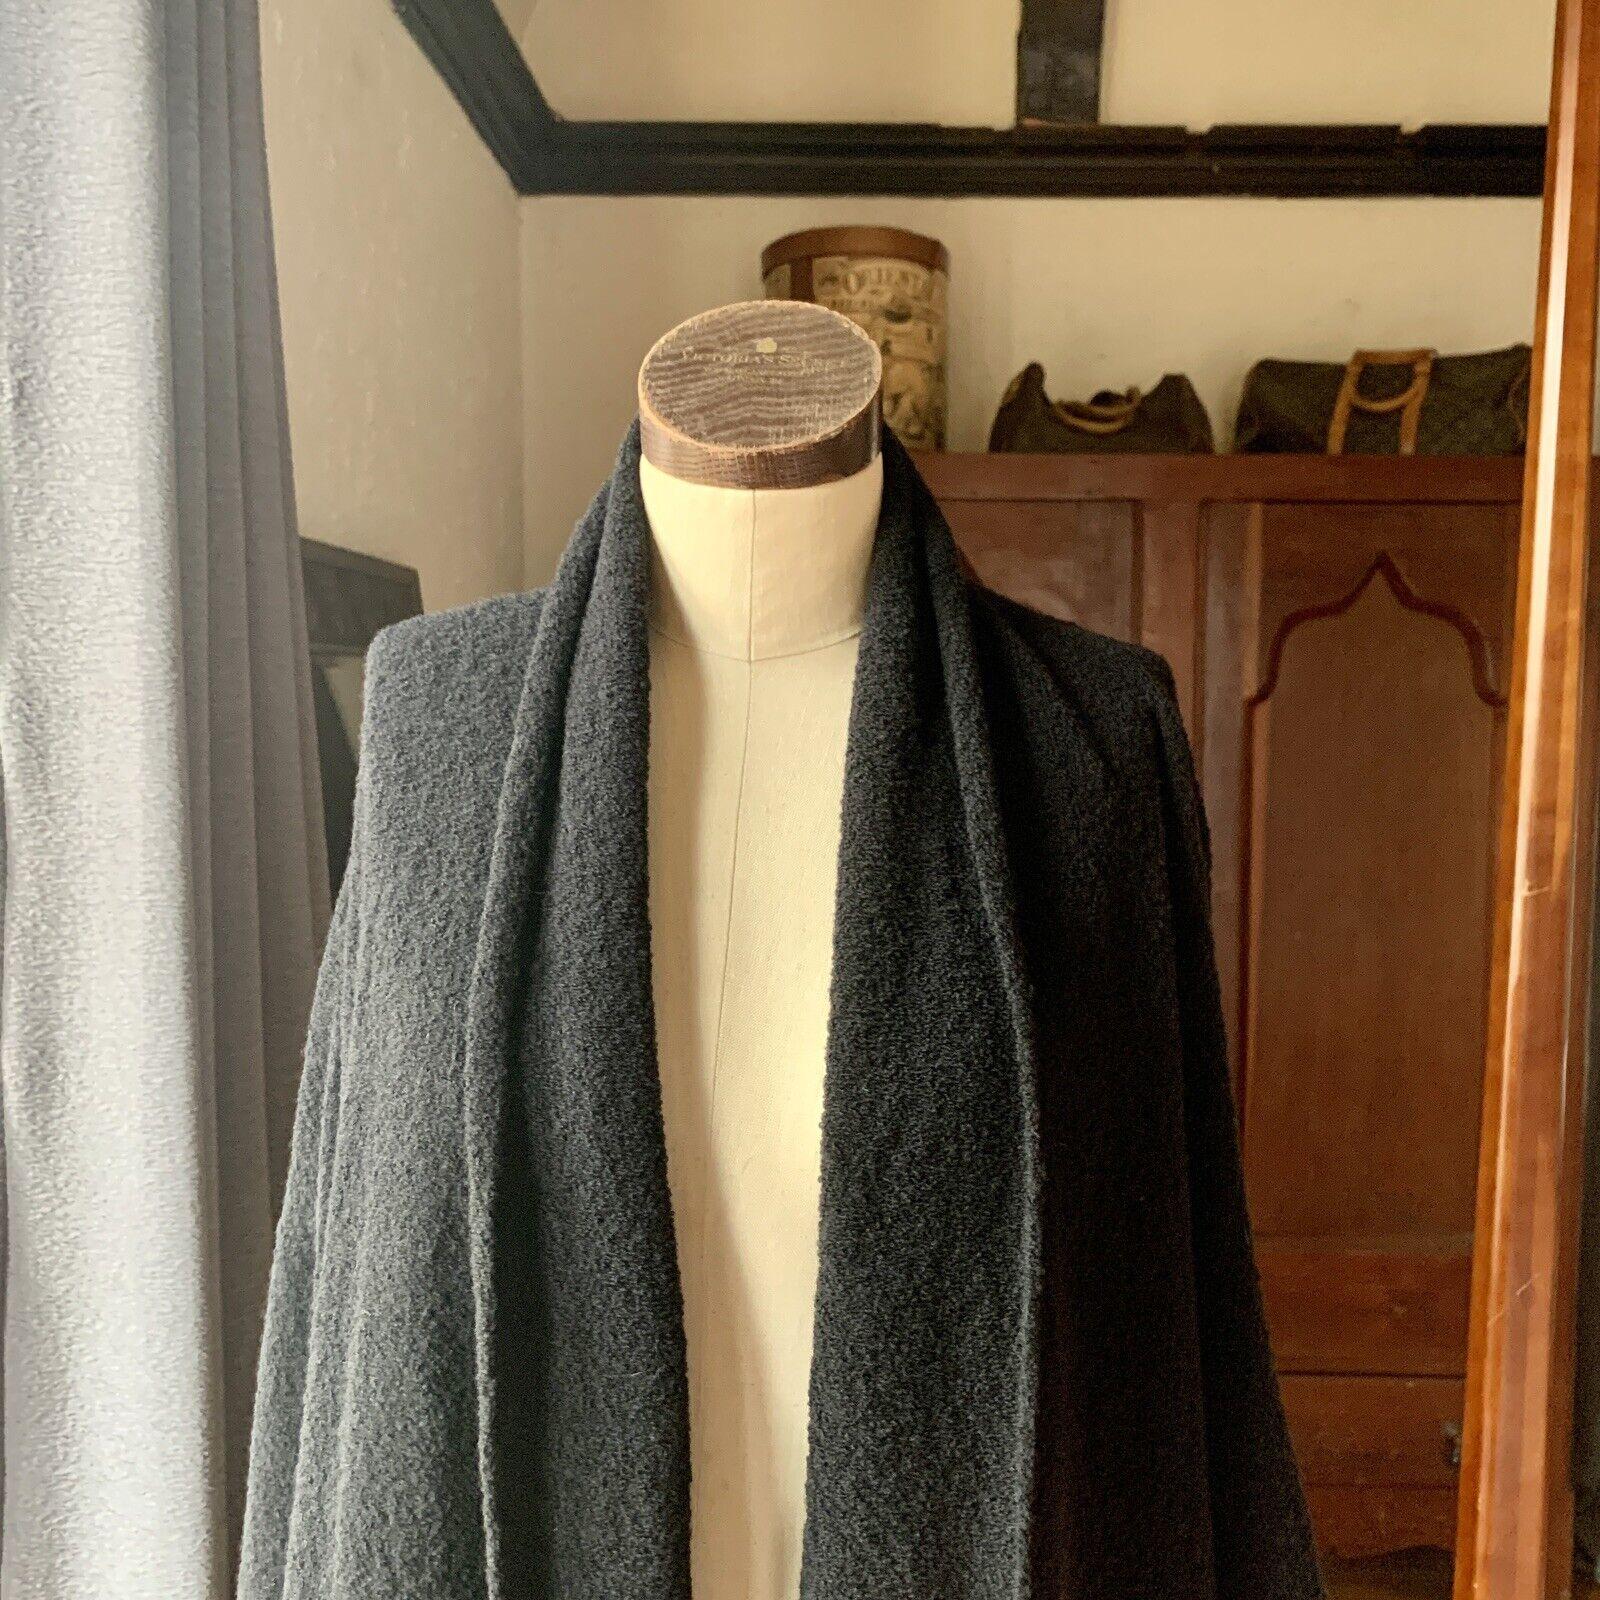 Eskandar, Winter 2014 Collection, Scrunched Shawl Collar Cardigan Long Plus, 80% Extra Fine Wool, 20% Polyamide, Size O/S, Drop Shoulder, Made in Scotland

Measurements Laying Flat:
Bust: 38